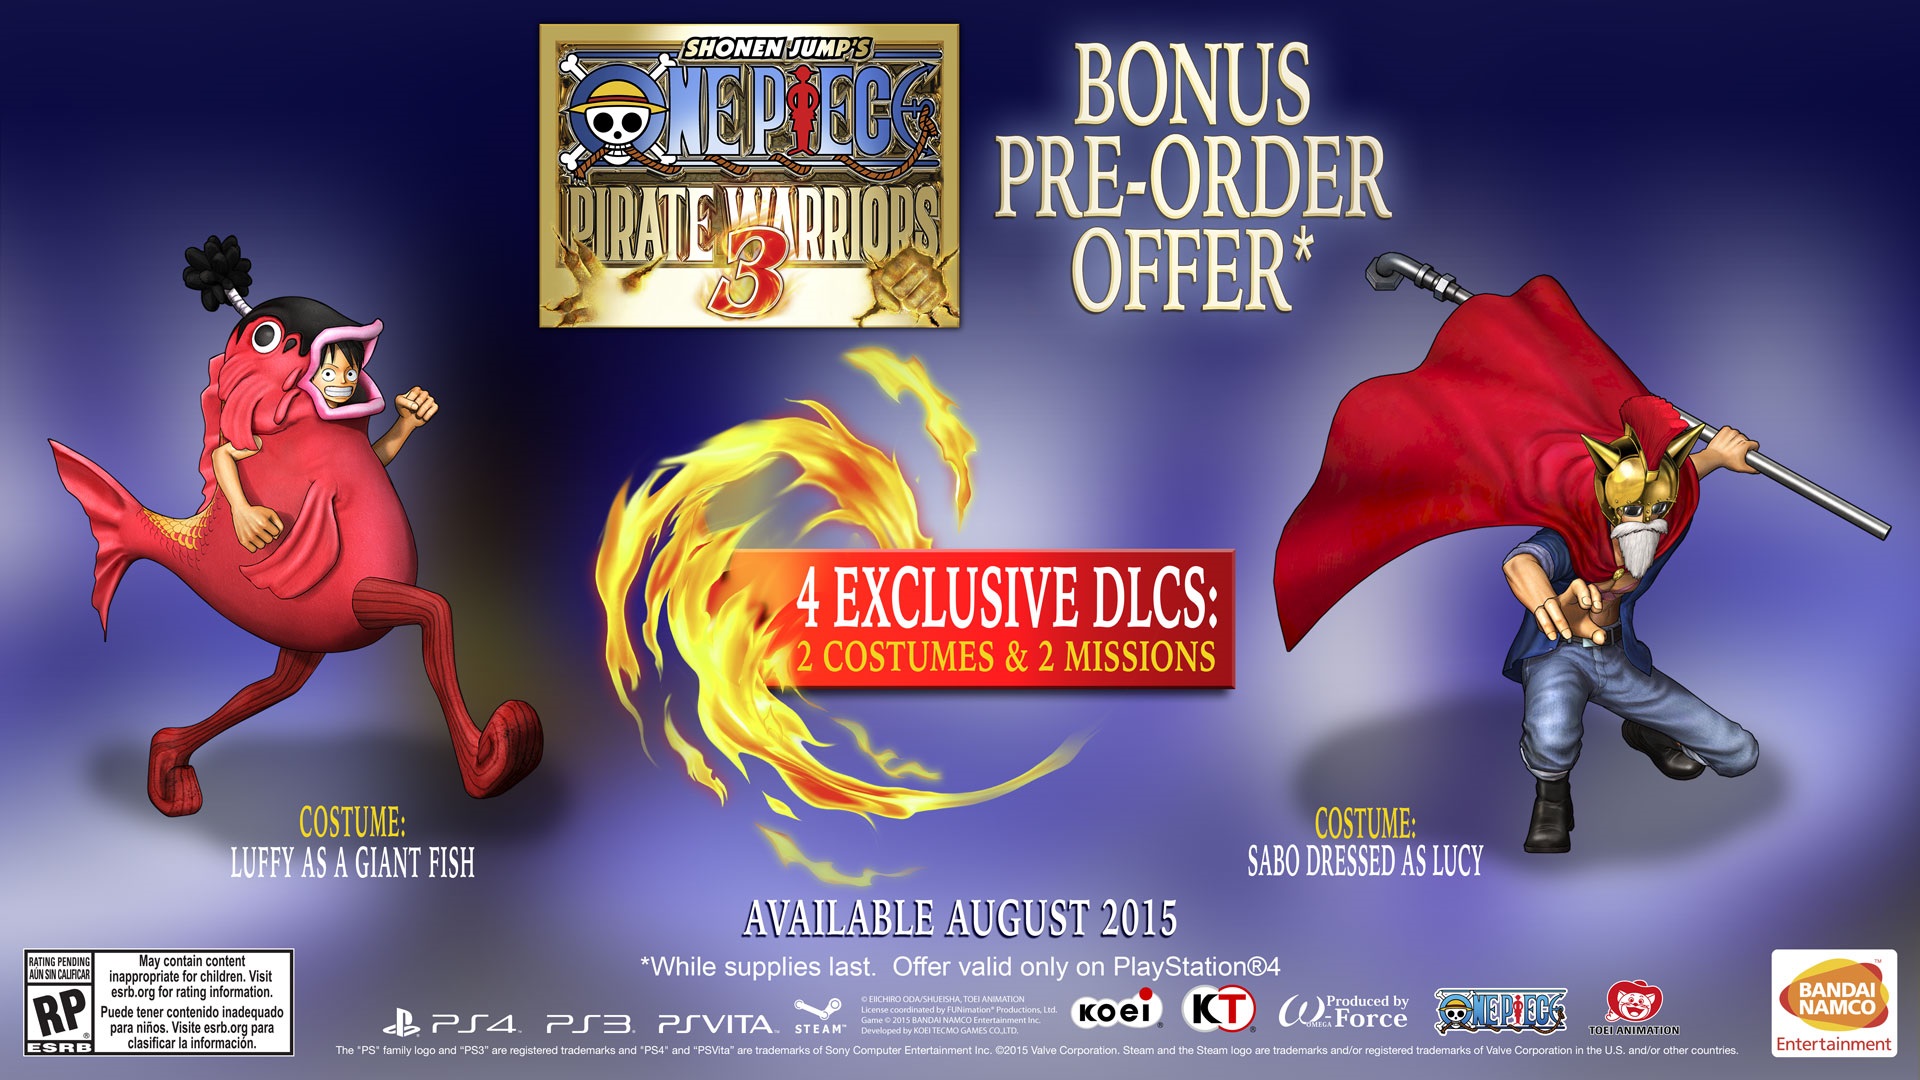 One Piece: Pirate Warriors 3 Trailer and Pre-Order Offer Revealed Post Header